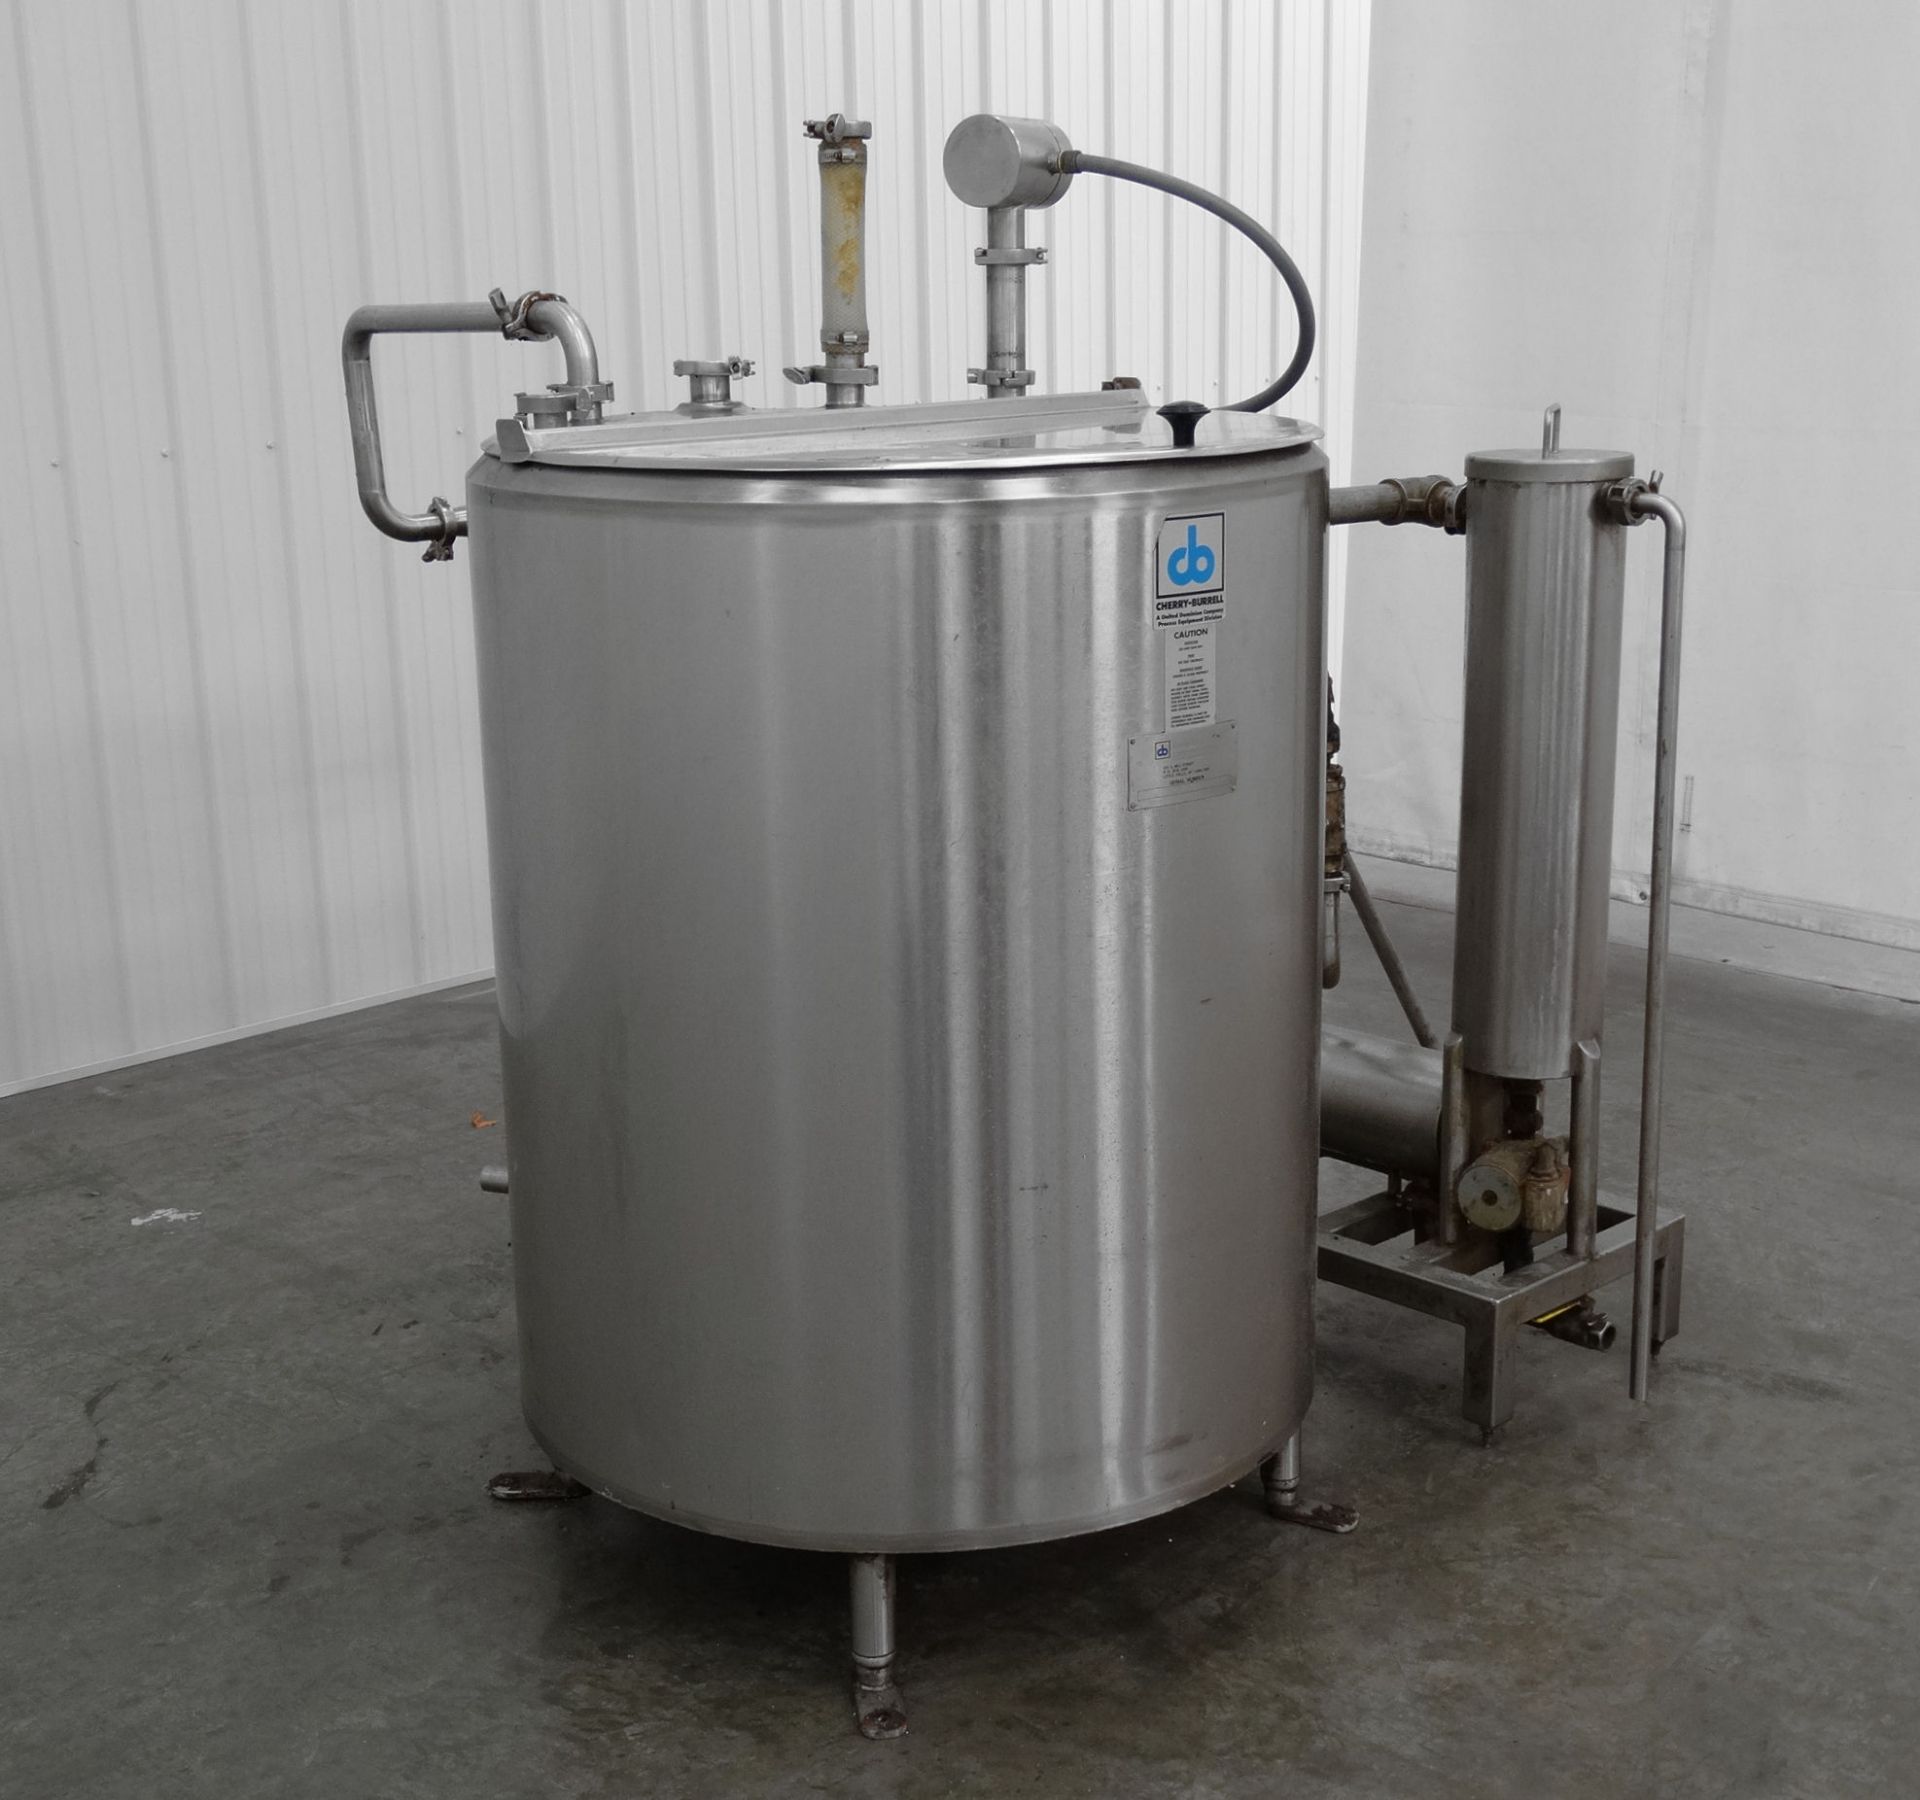 Cherry Burrell 200 Gal Tank with Spray Coating Nozzle - Image 6 of 14